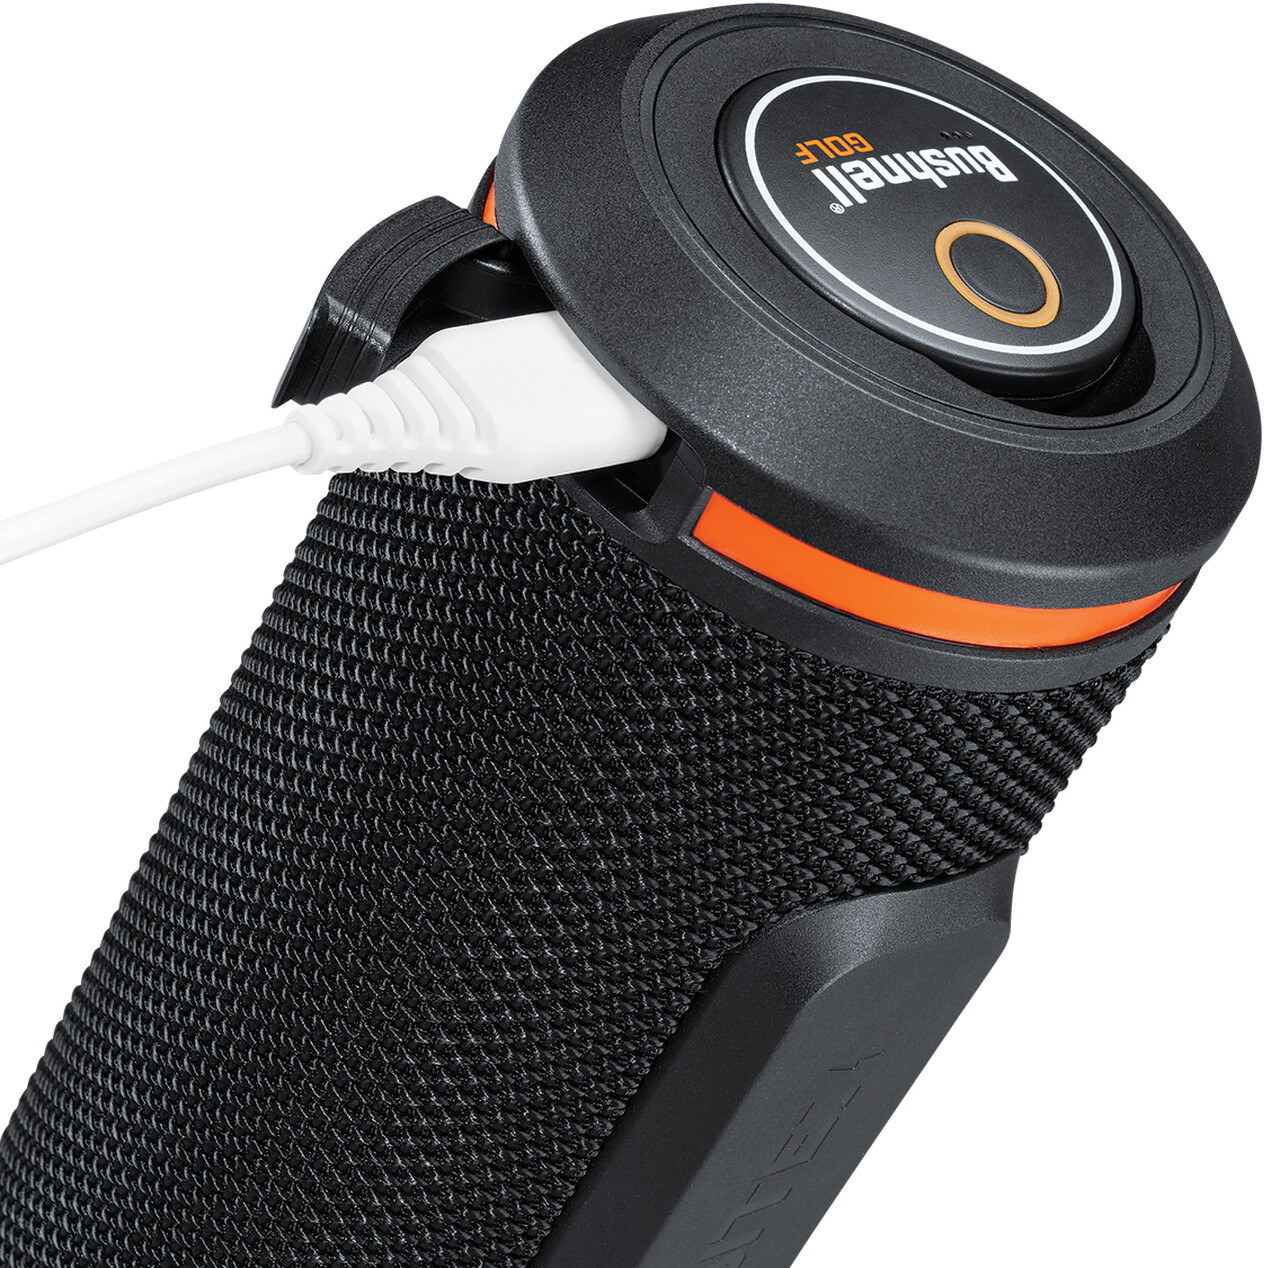 Buy Bushnell Wingman from £129.00 (Today) – Best Deals on idealo.co.uk